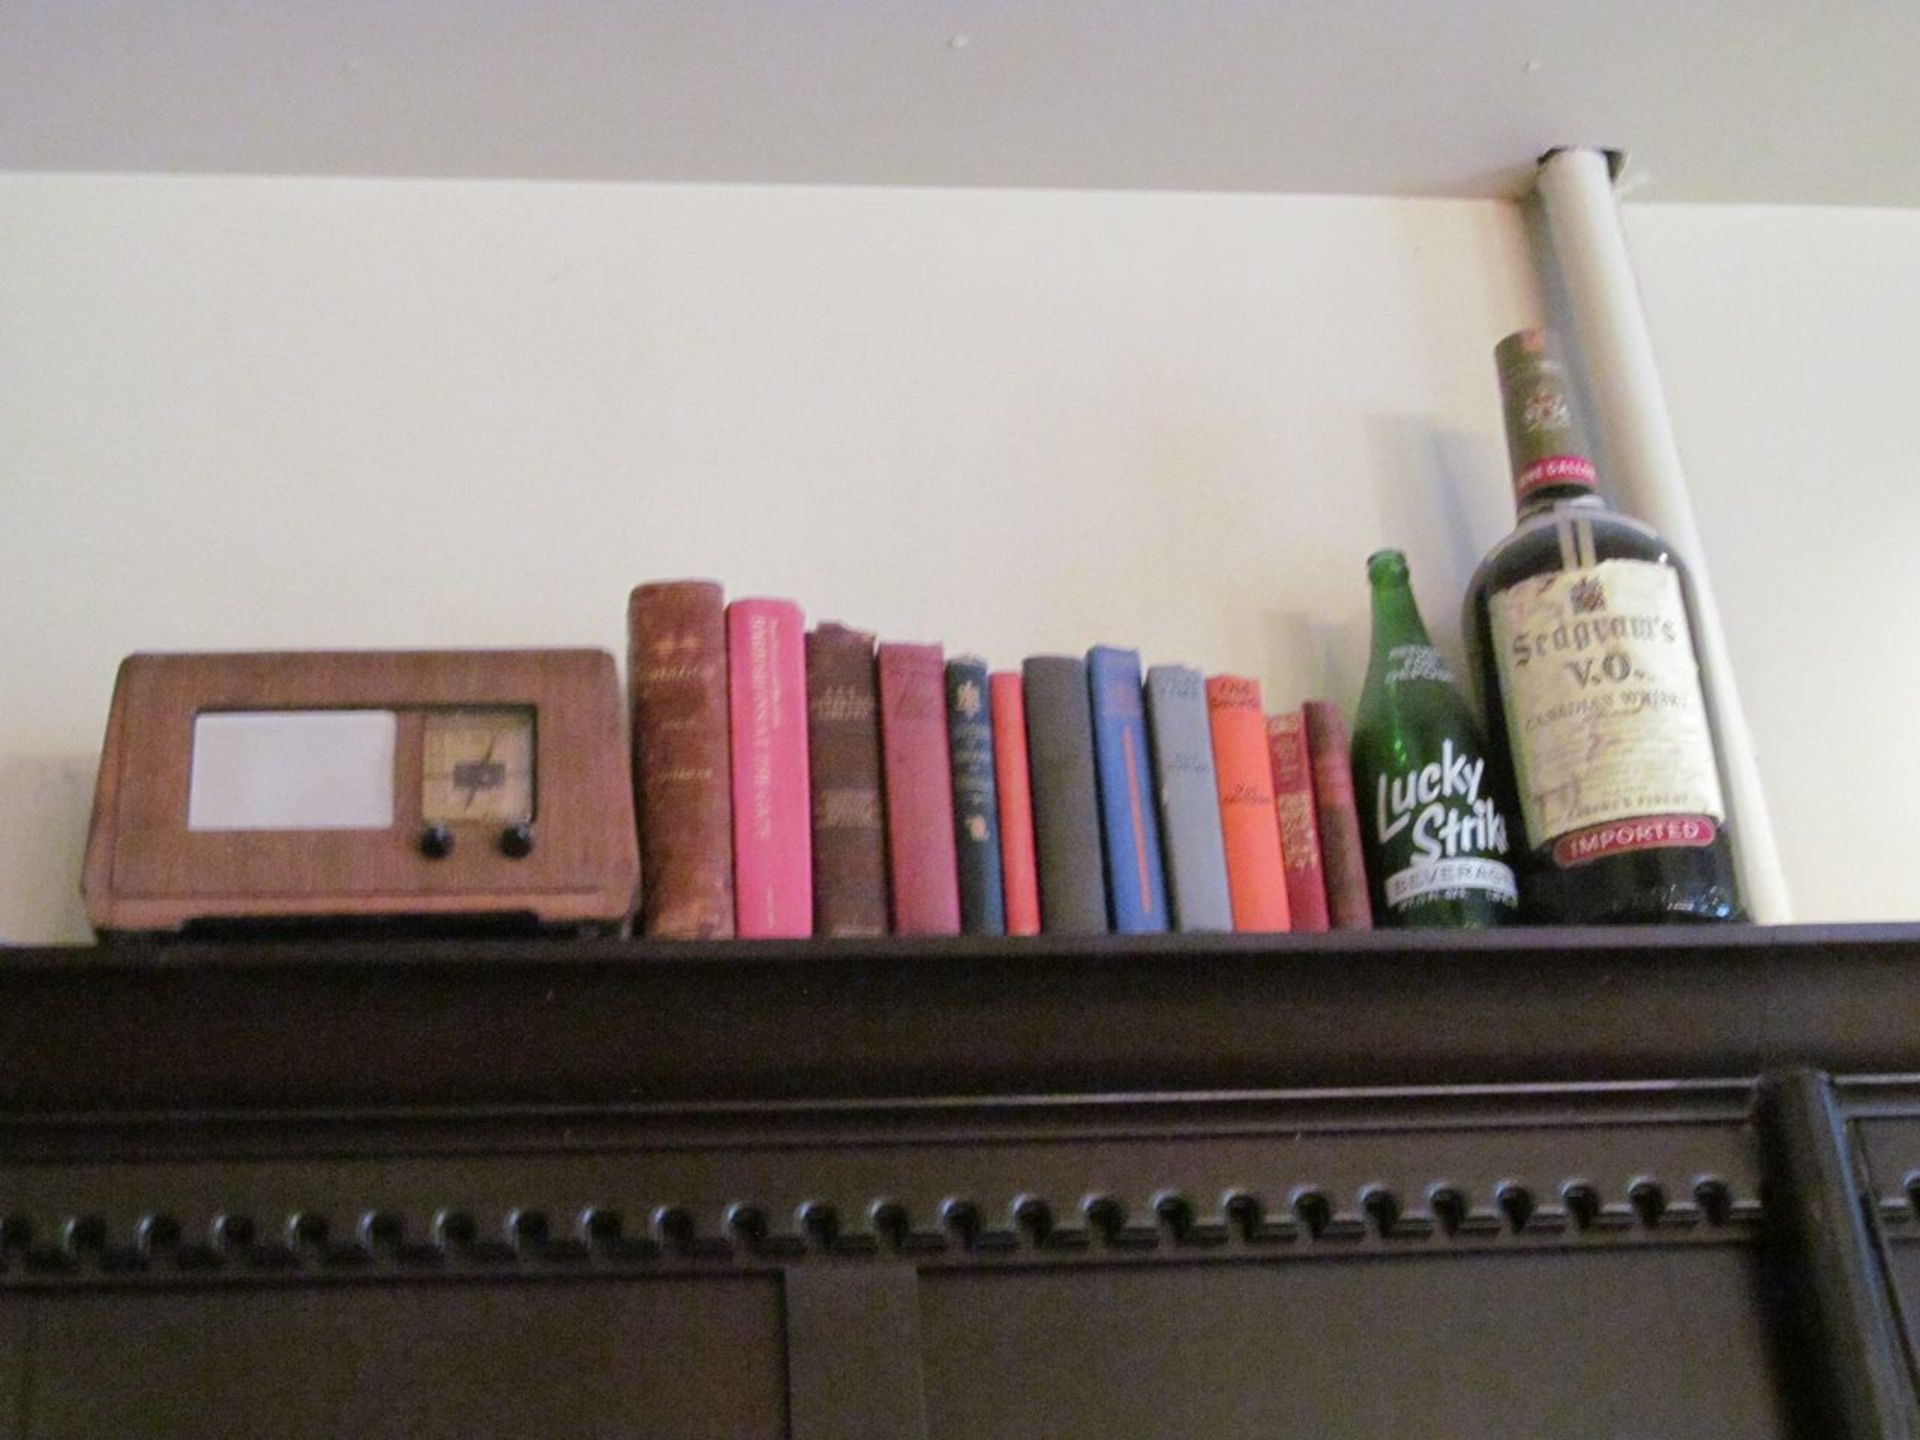 Lot - Antique Radio, Lucky Strike Bottle, Seagrams Bottle, and Assorted Books (Billiards Room)